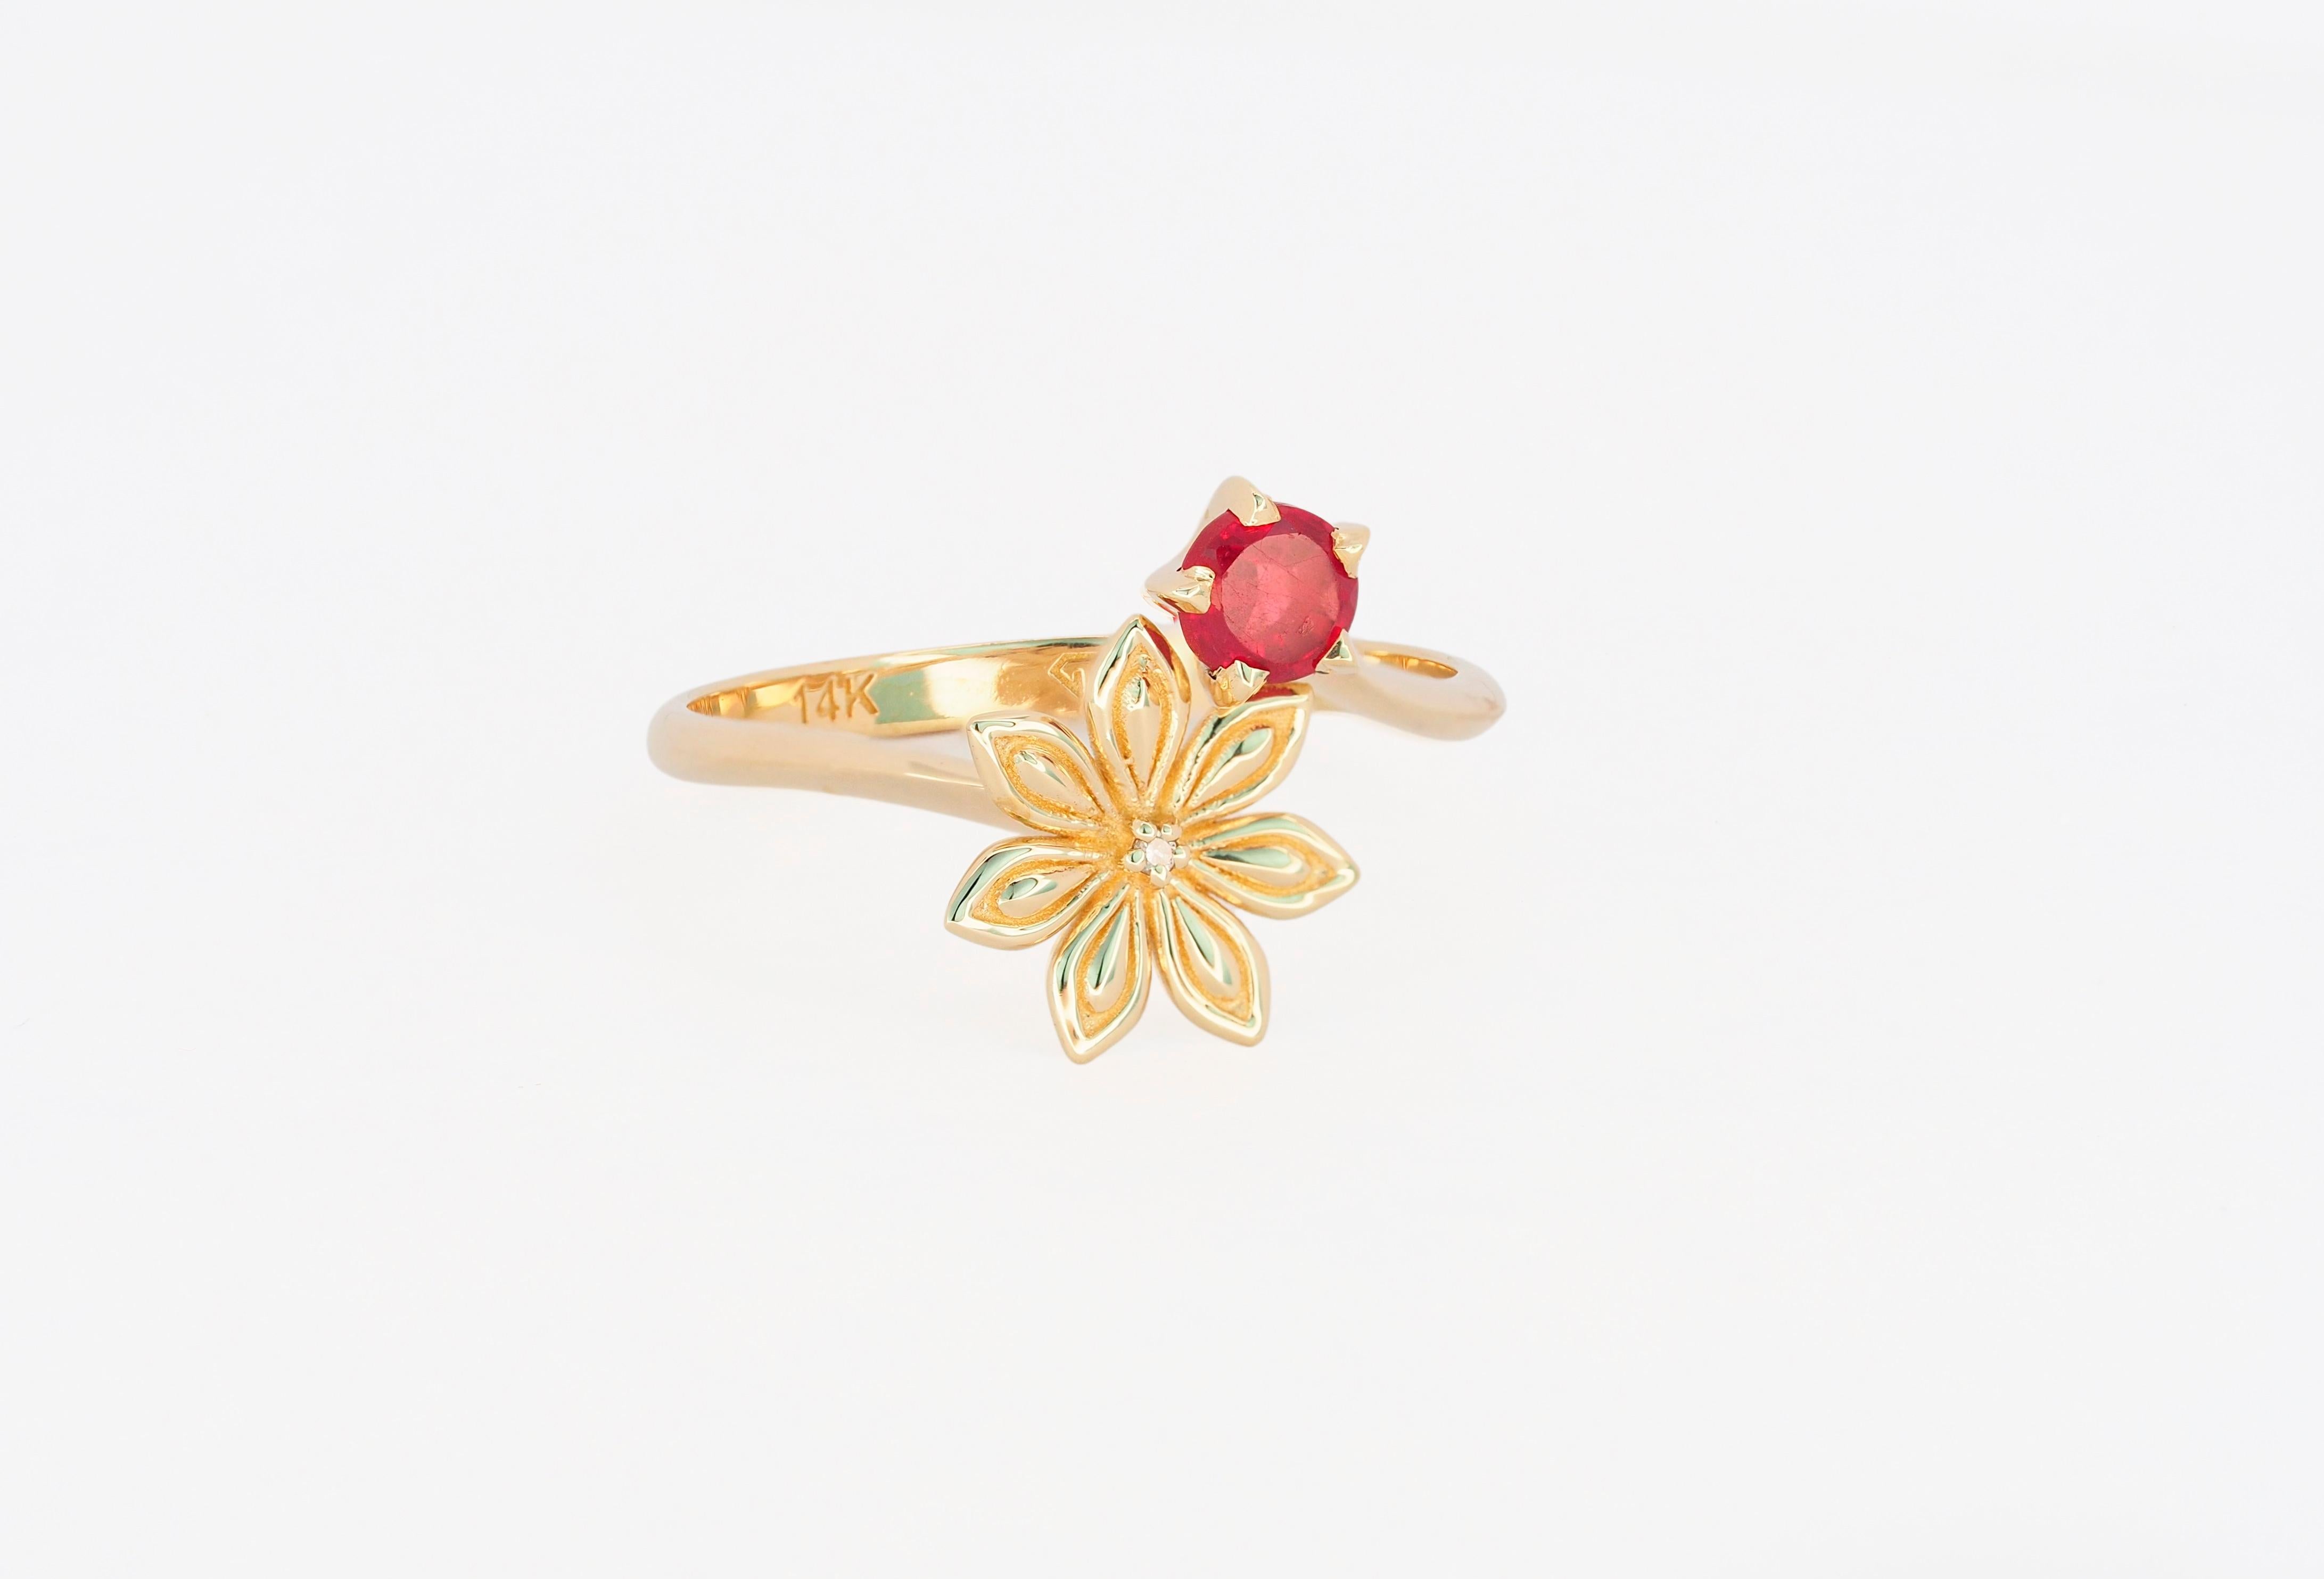 For Sale:   Ruby gold ring. 14 Karat Gold Star Anise Flower Ring. July birthstone ruby ring 5